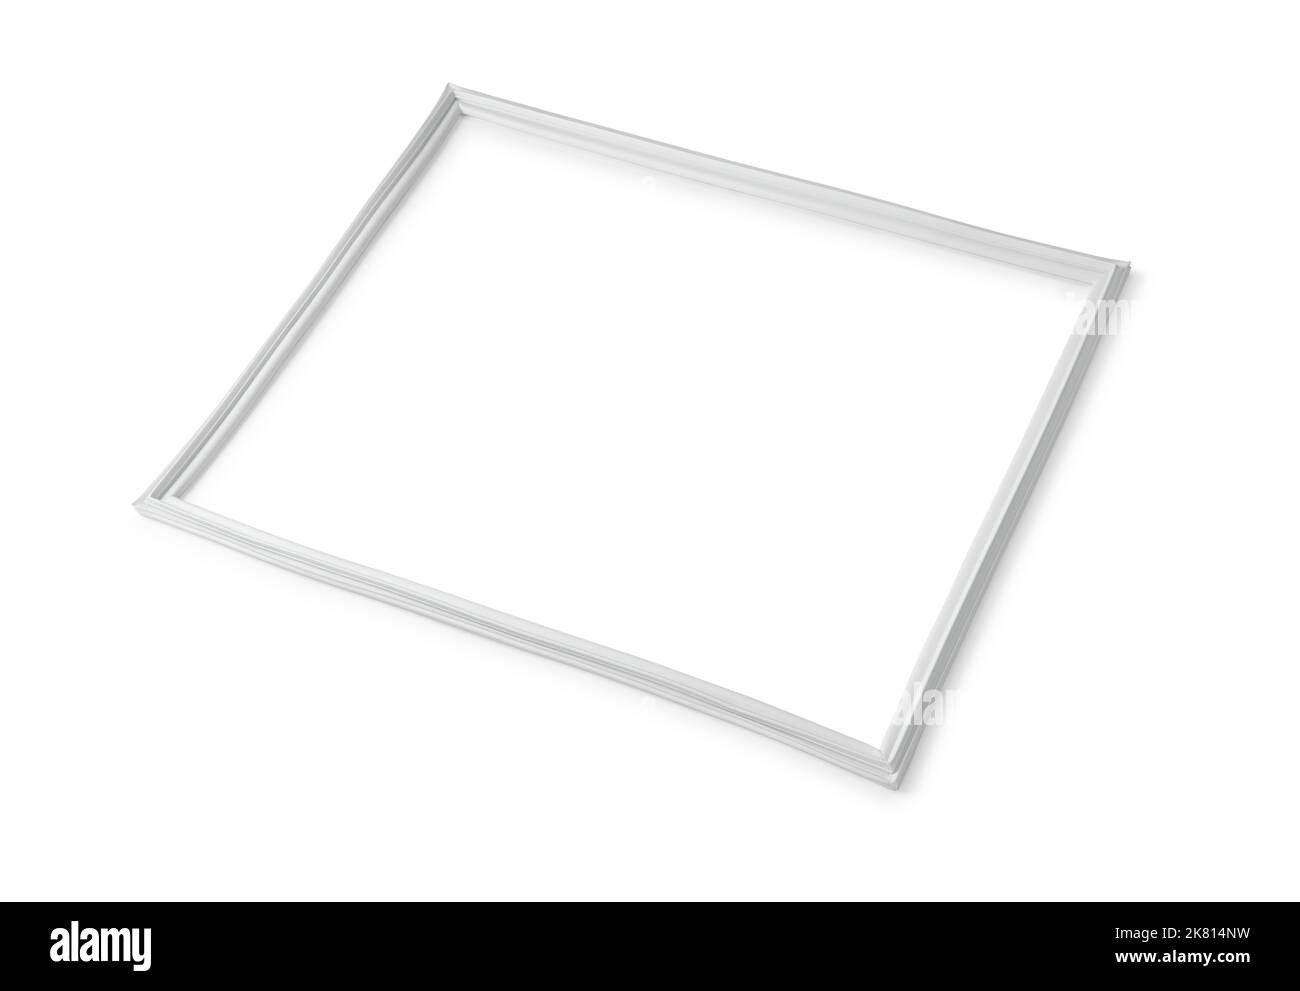 Refrigerator door gasket seal isolated on white Stock Photo